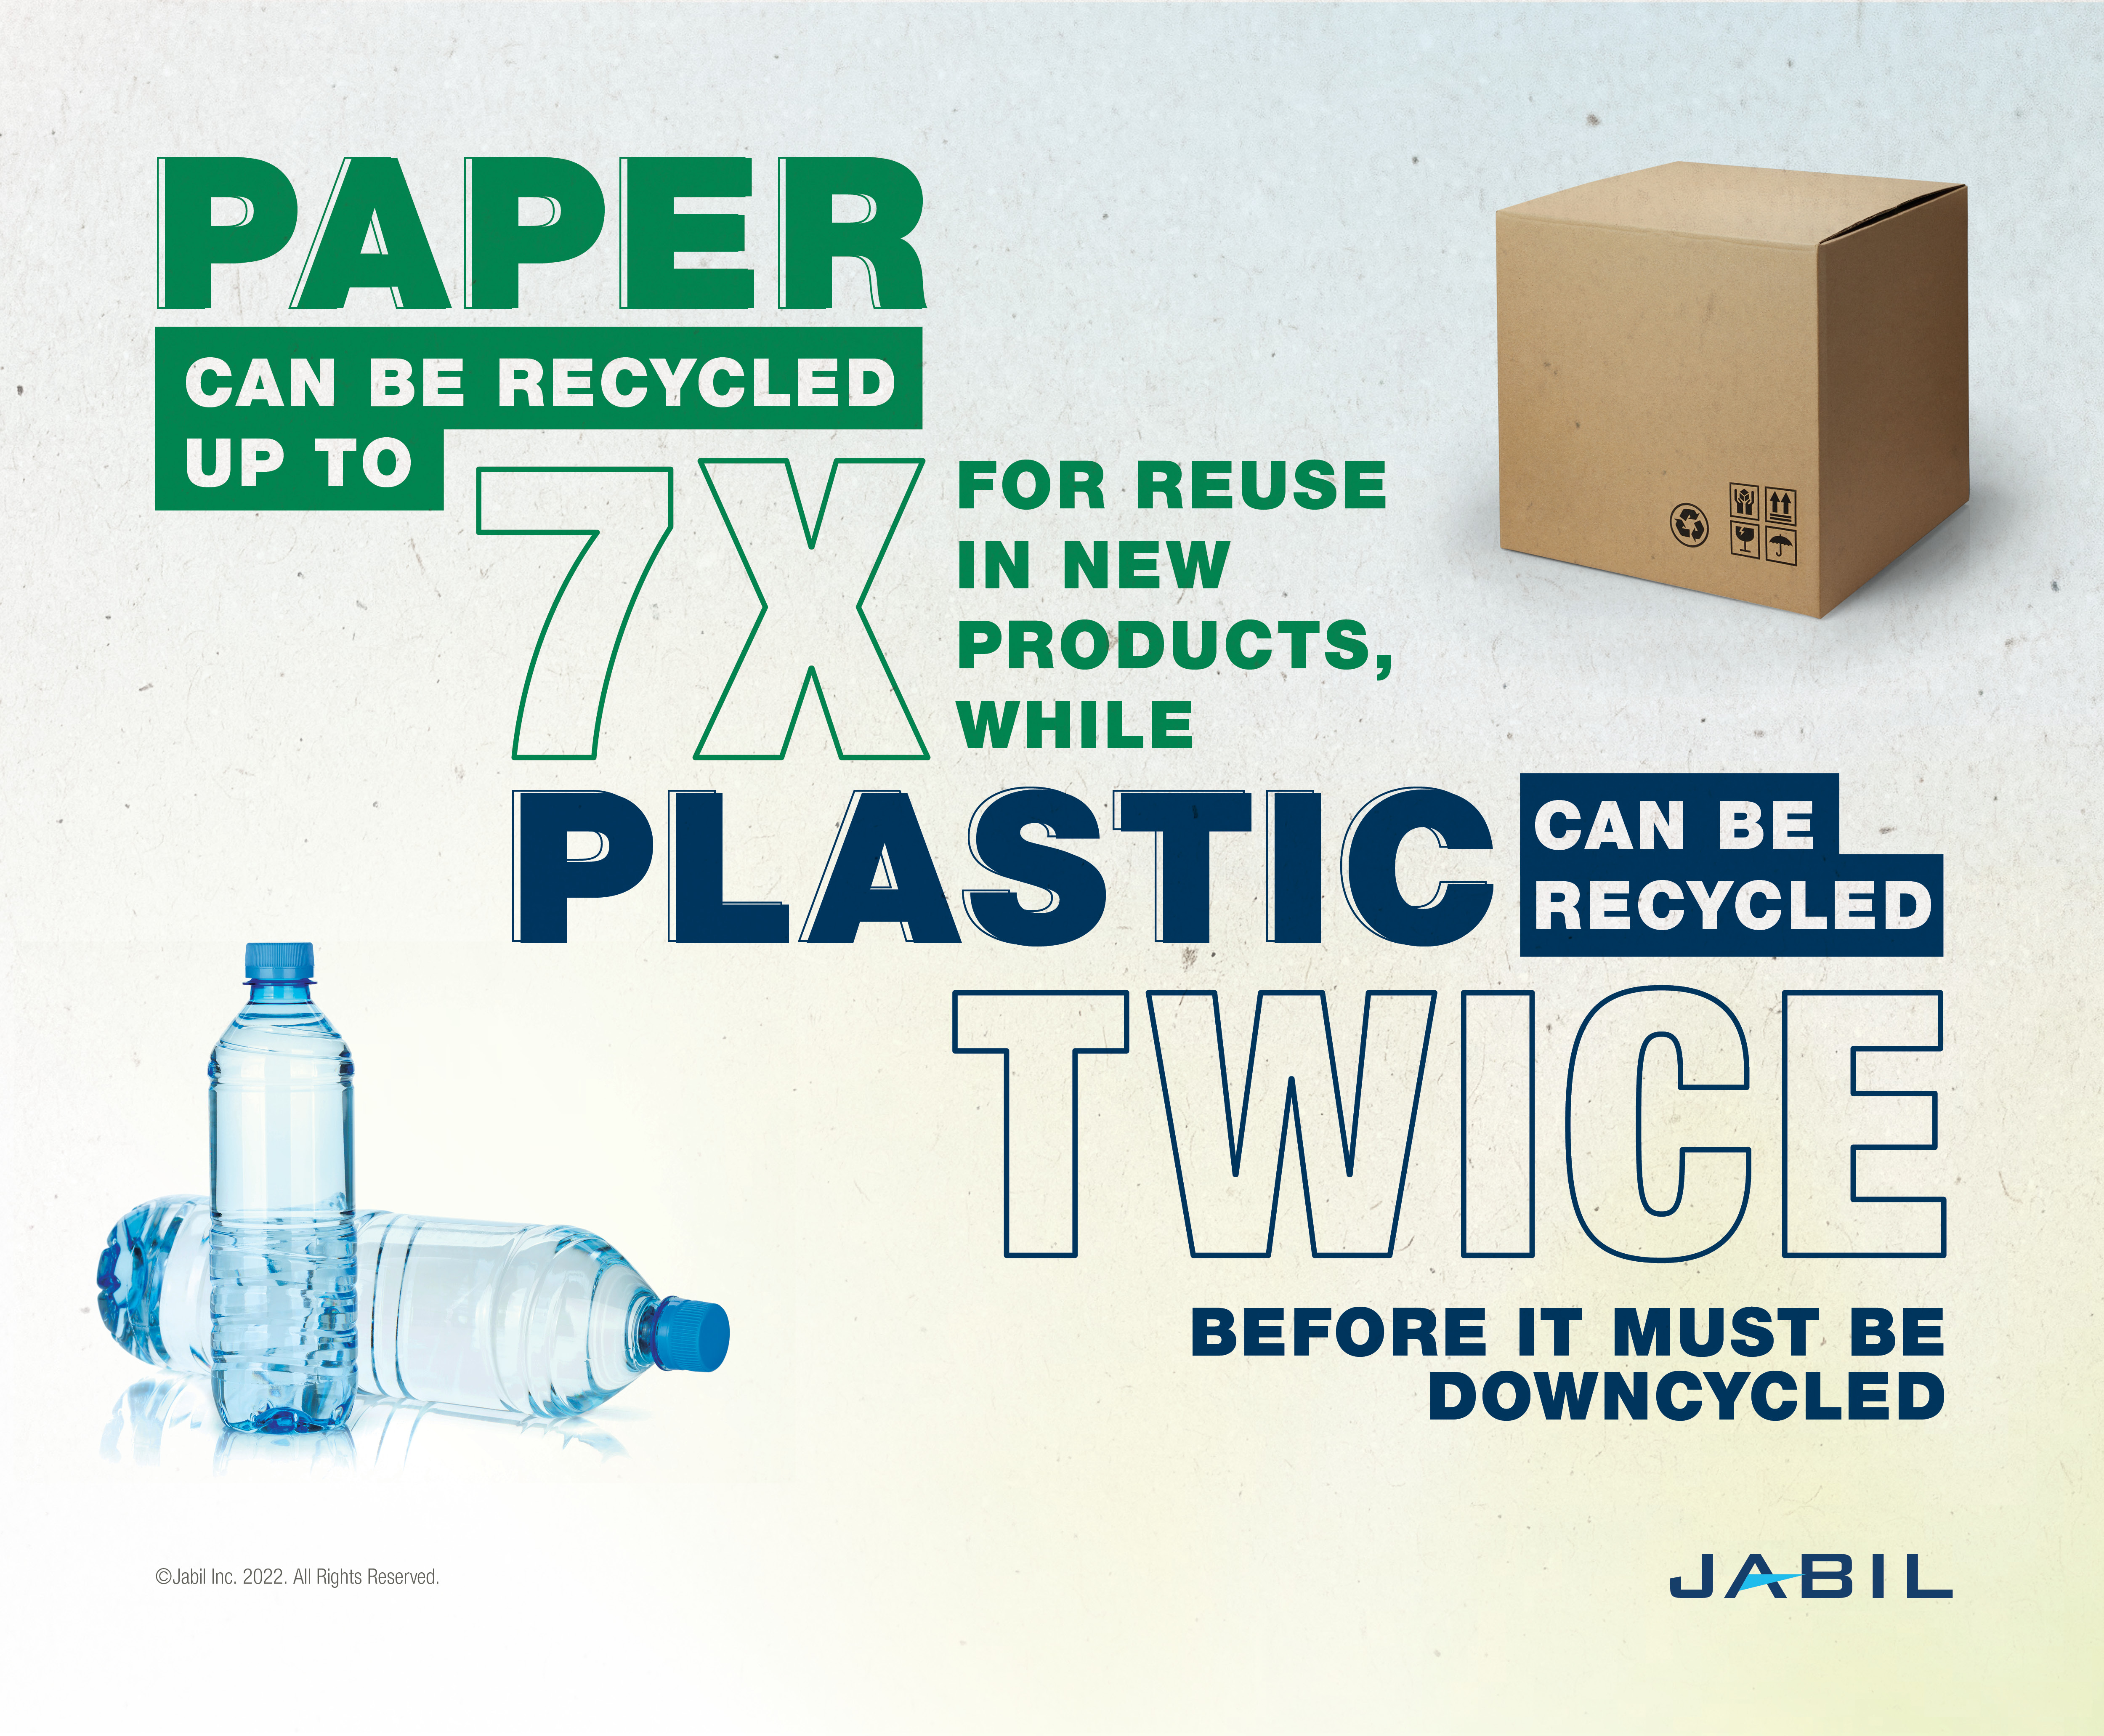 Paper-based produce packaging for sustainability, 2021-04-06